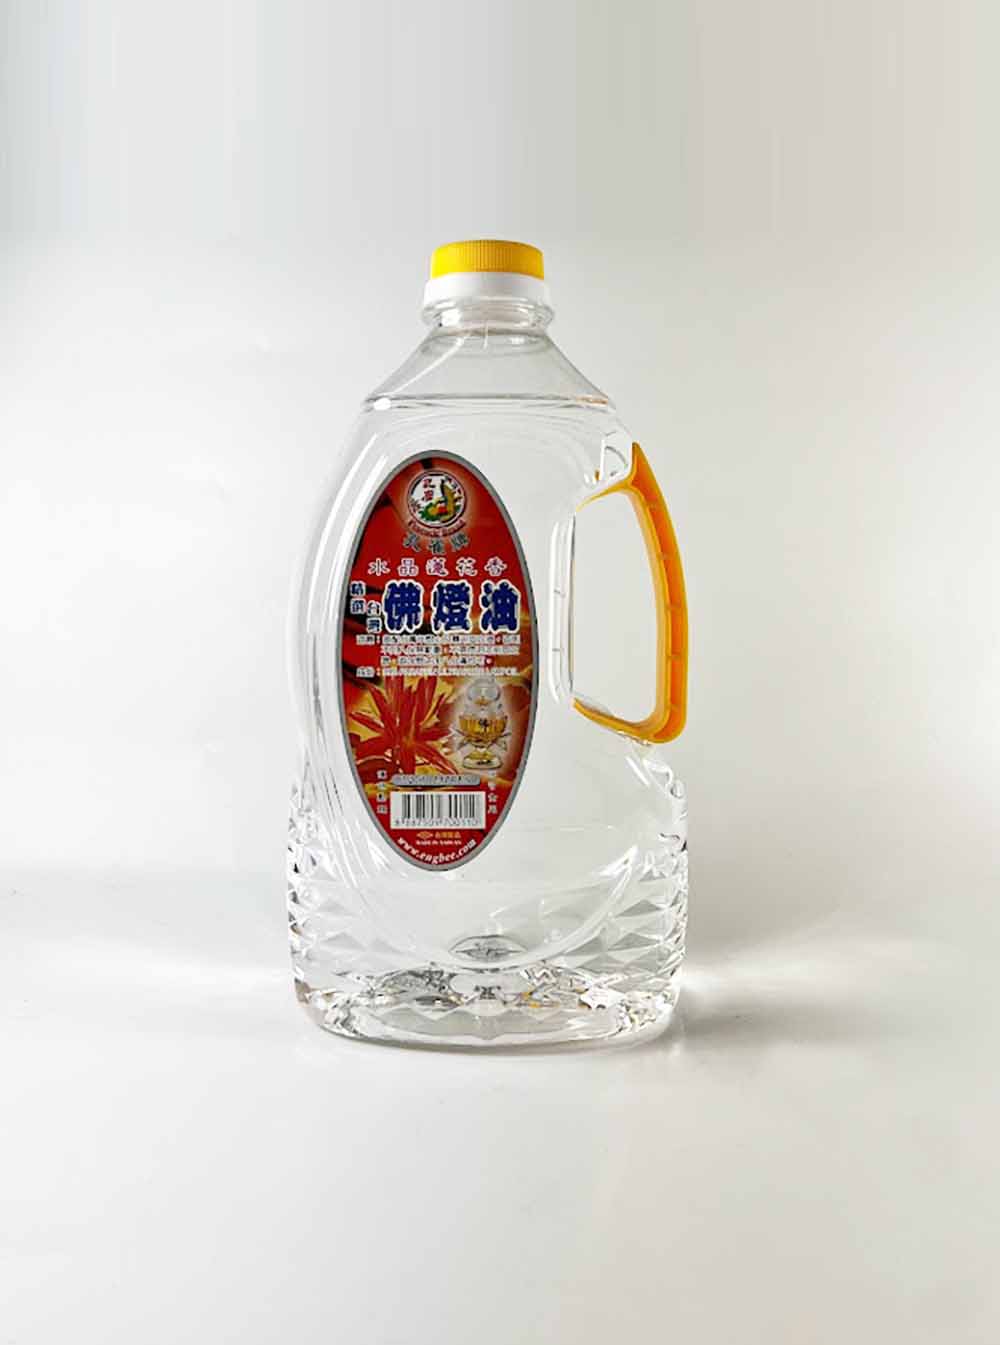 Peacock Brand Crystal Lamp Oil Clear (2L)